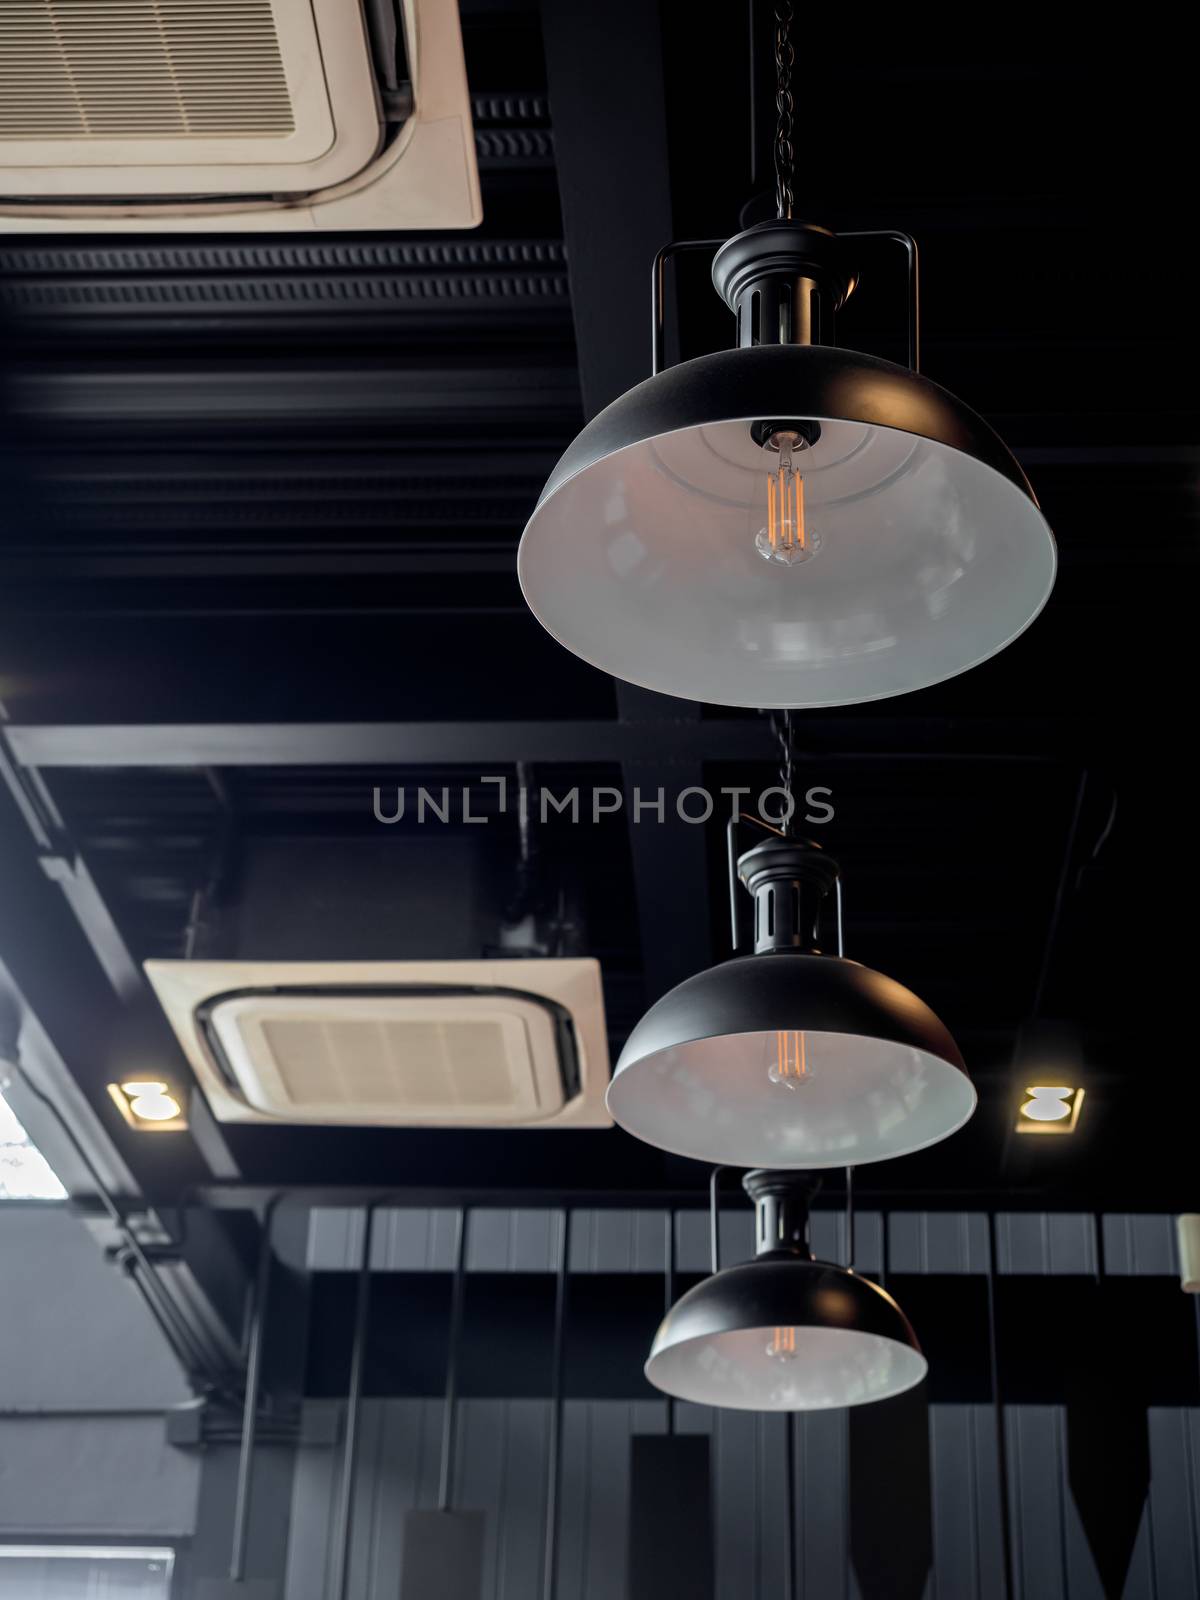 Three black round modern ceiling lights and cassette type air conditioner inside the cafe loft style, vertical style.